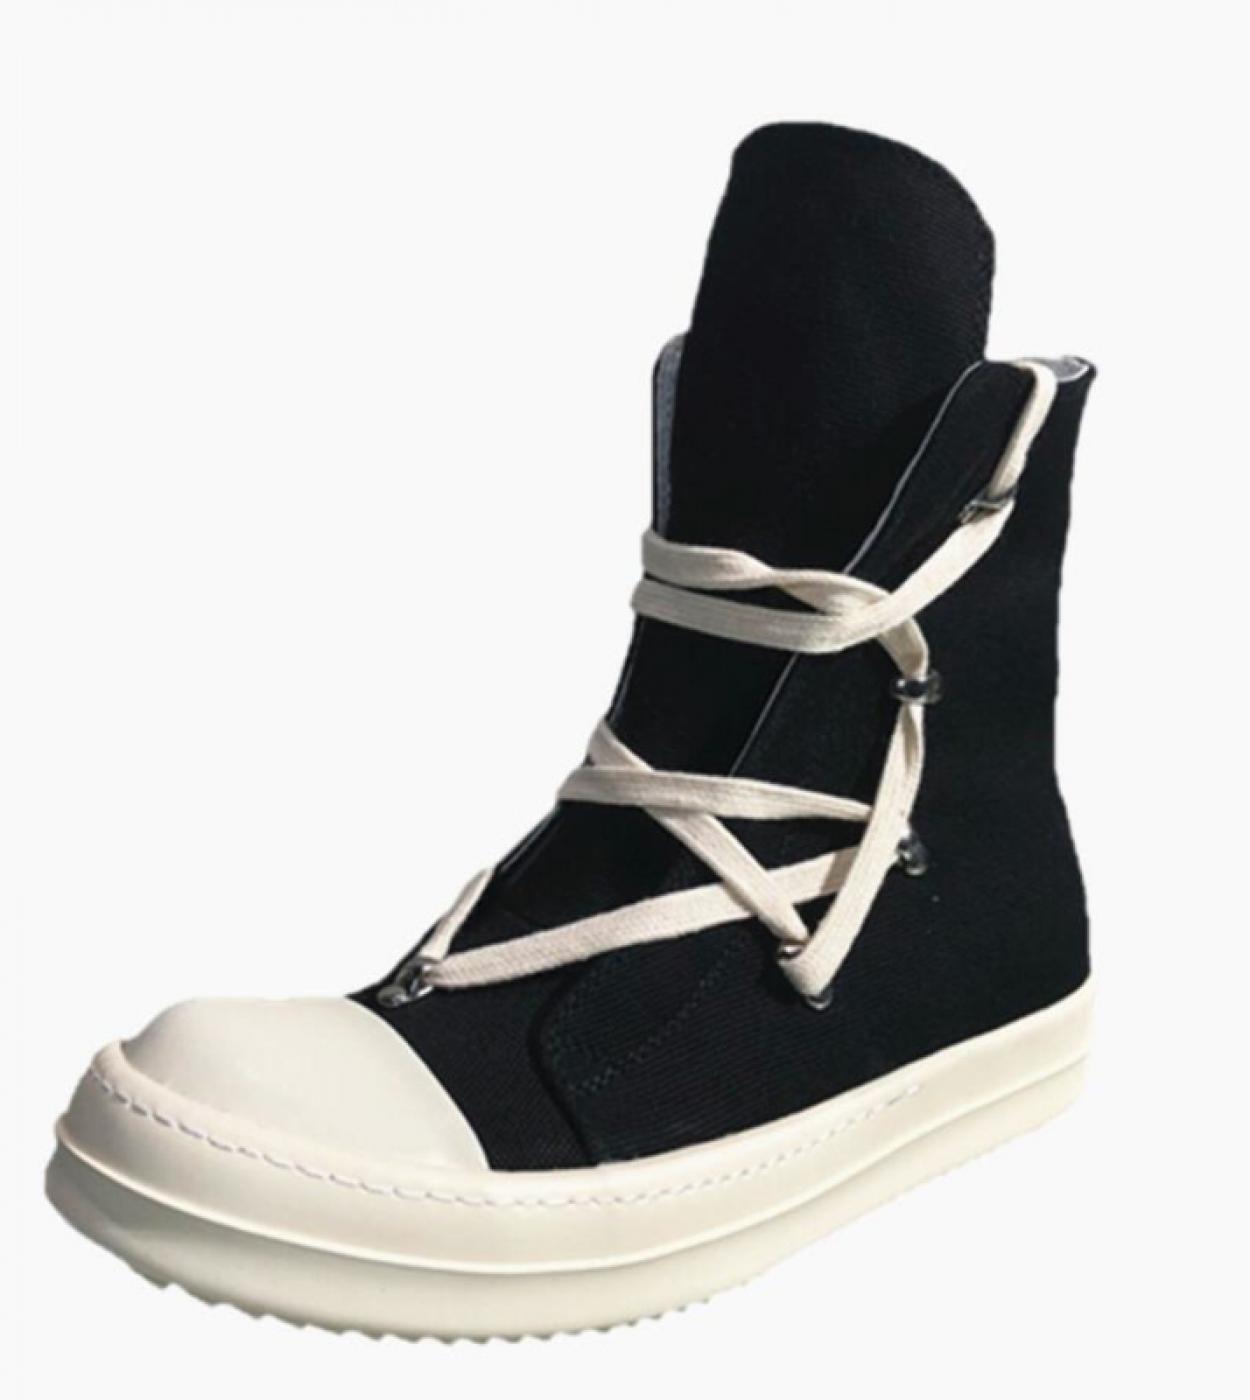 Big Size Men Canvas Boot Zipper Fashion Mens Ankle Boots New Male Casual Street Sneakers